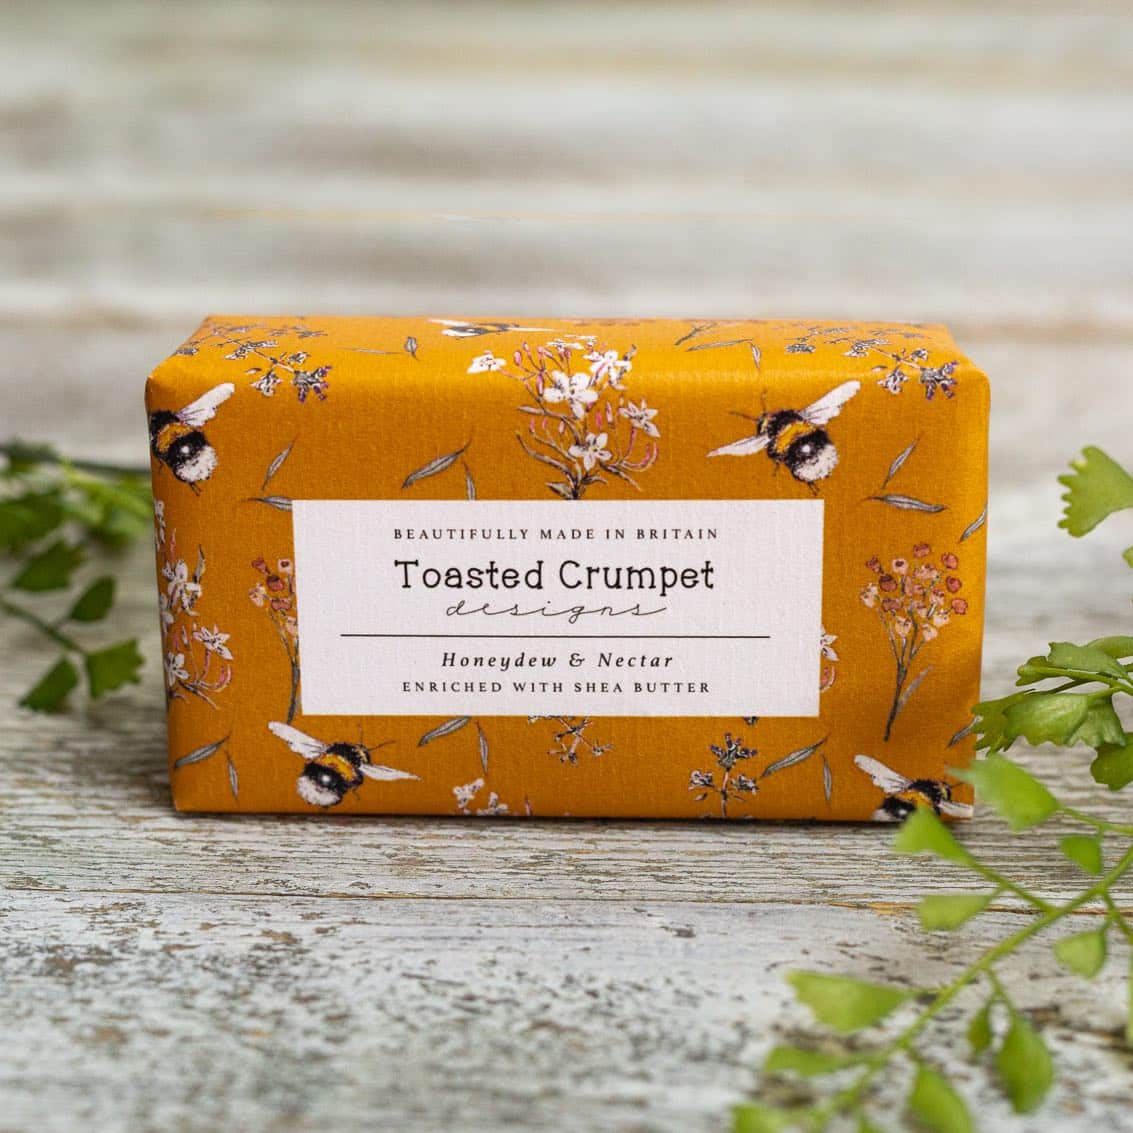 Honeydew & Nectar Soap by Toasted Crumpet.Soap by Toasted Crumpet.